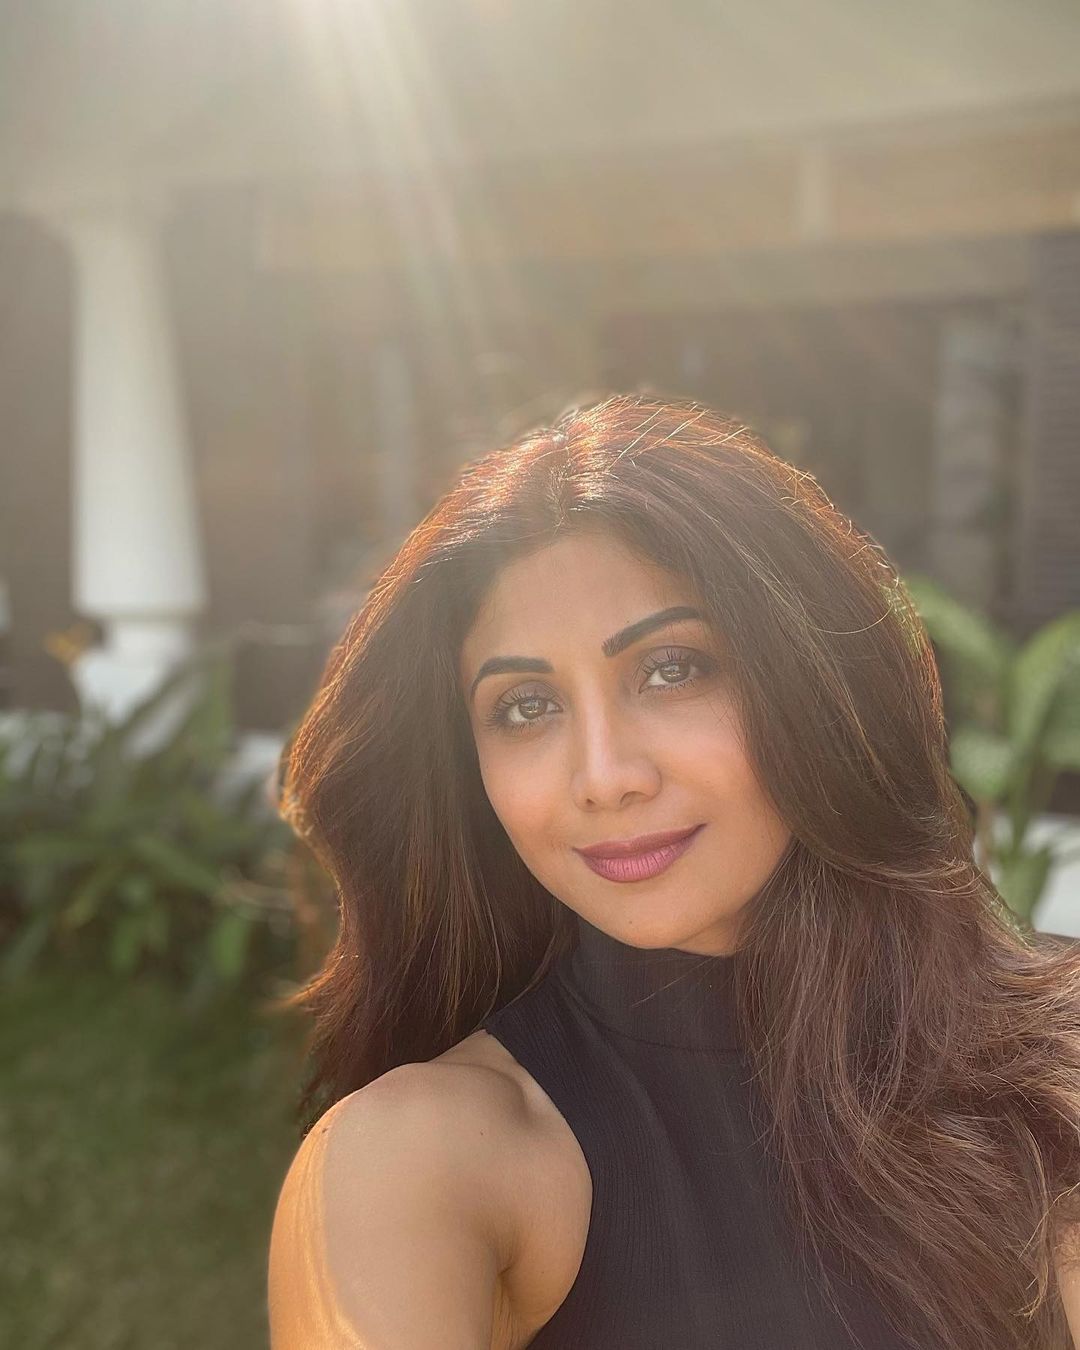 Shilpa Shetty tells Police she was busy with her own work didn't know about Raj Kundra's apps in pronographic content case 